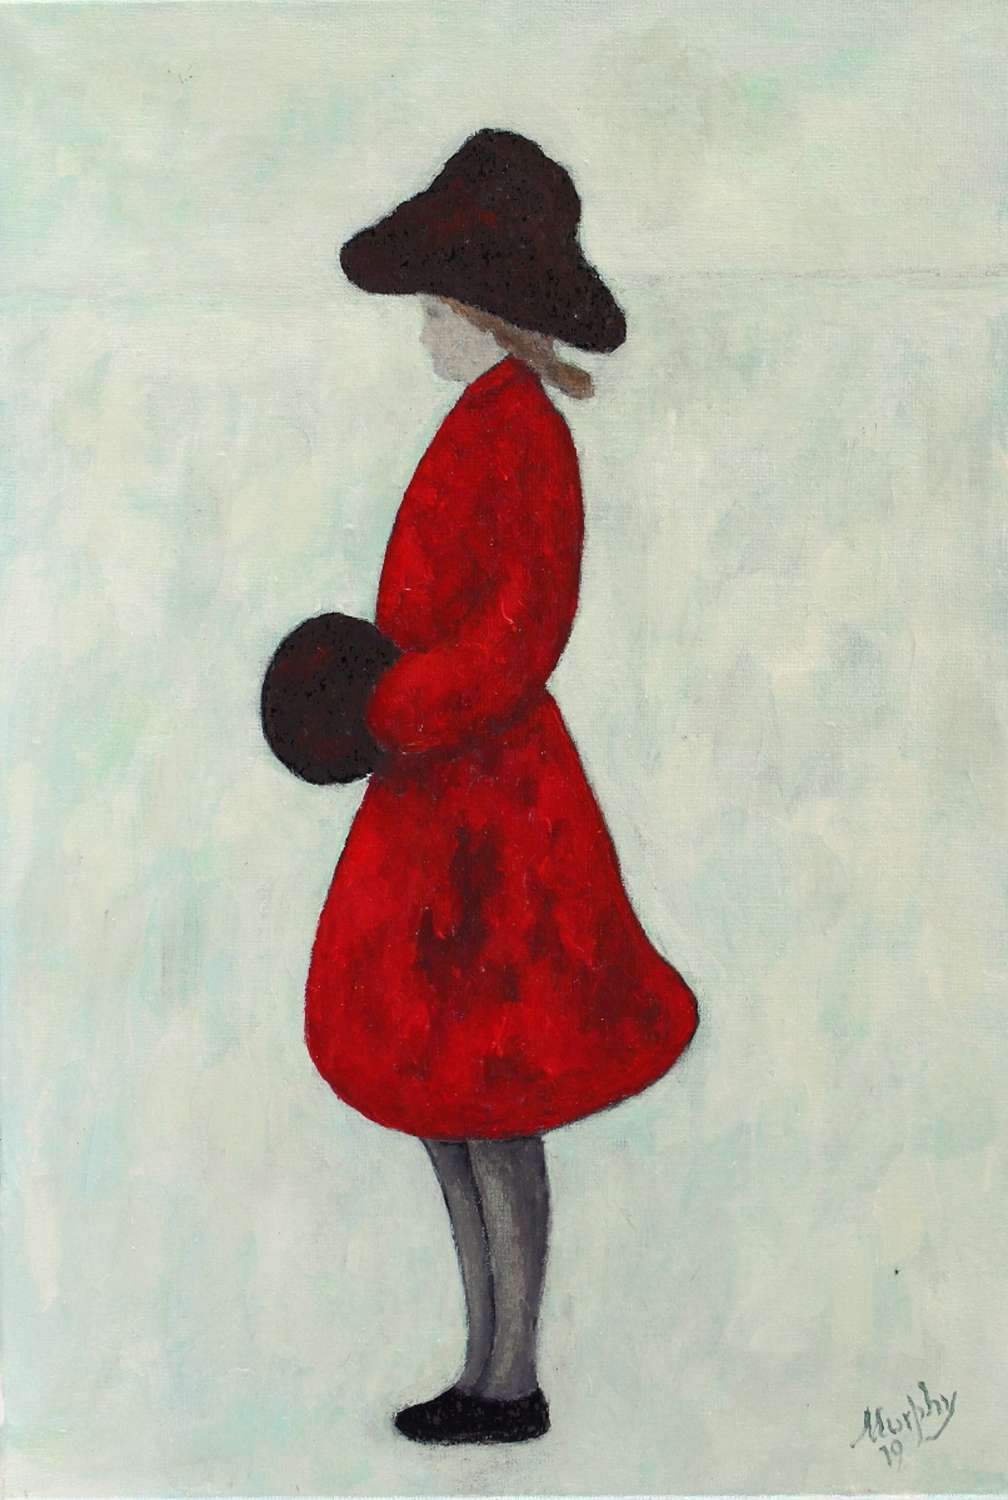 Anthony Murphy. The Red Coat.